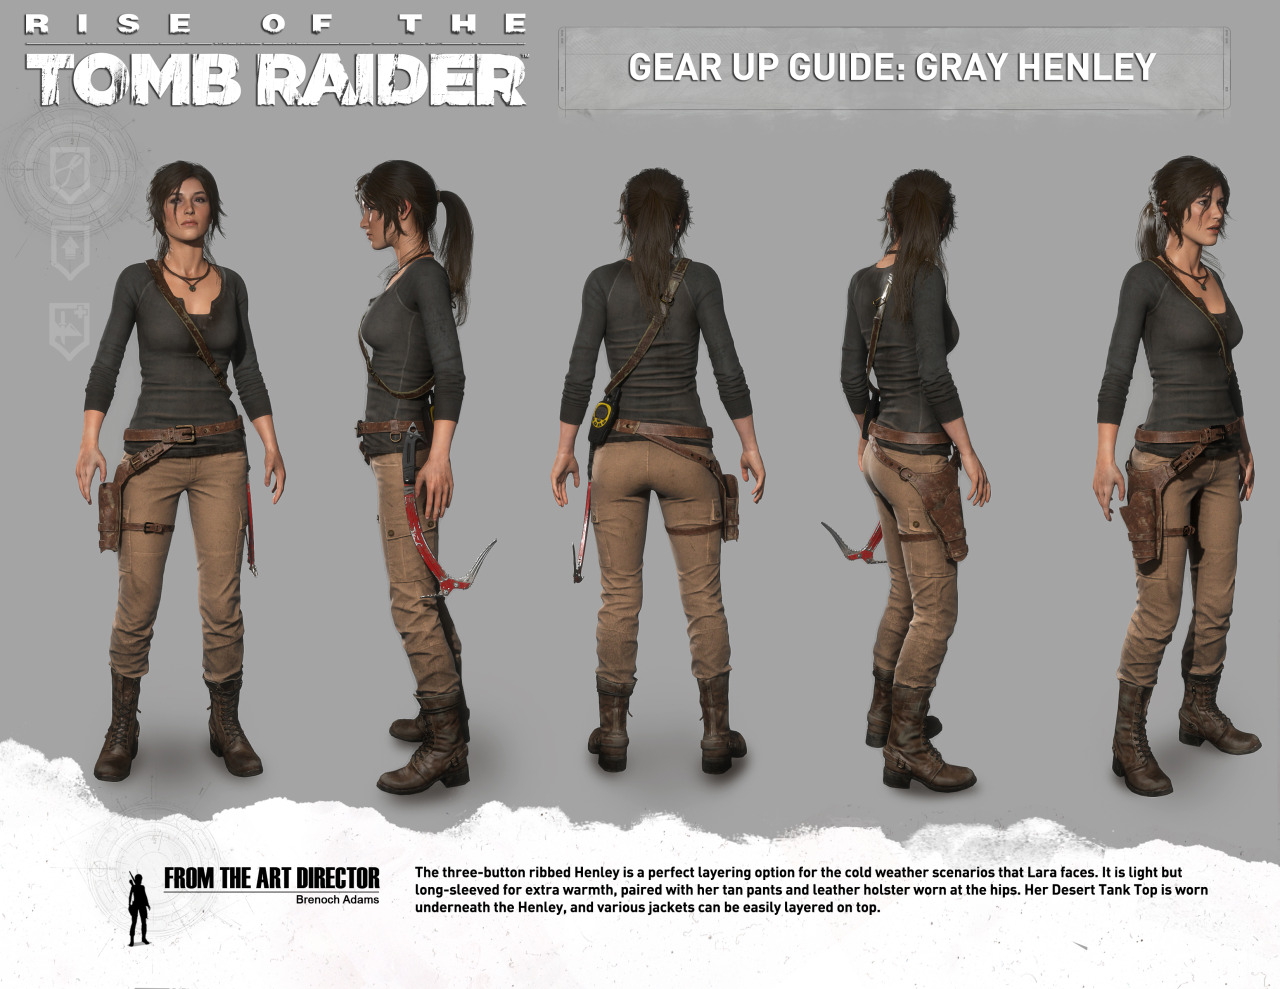 Rise of the Tomb Raider Lara nude mod - Page 34 - Adult 